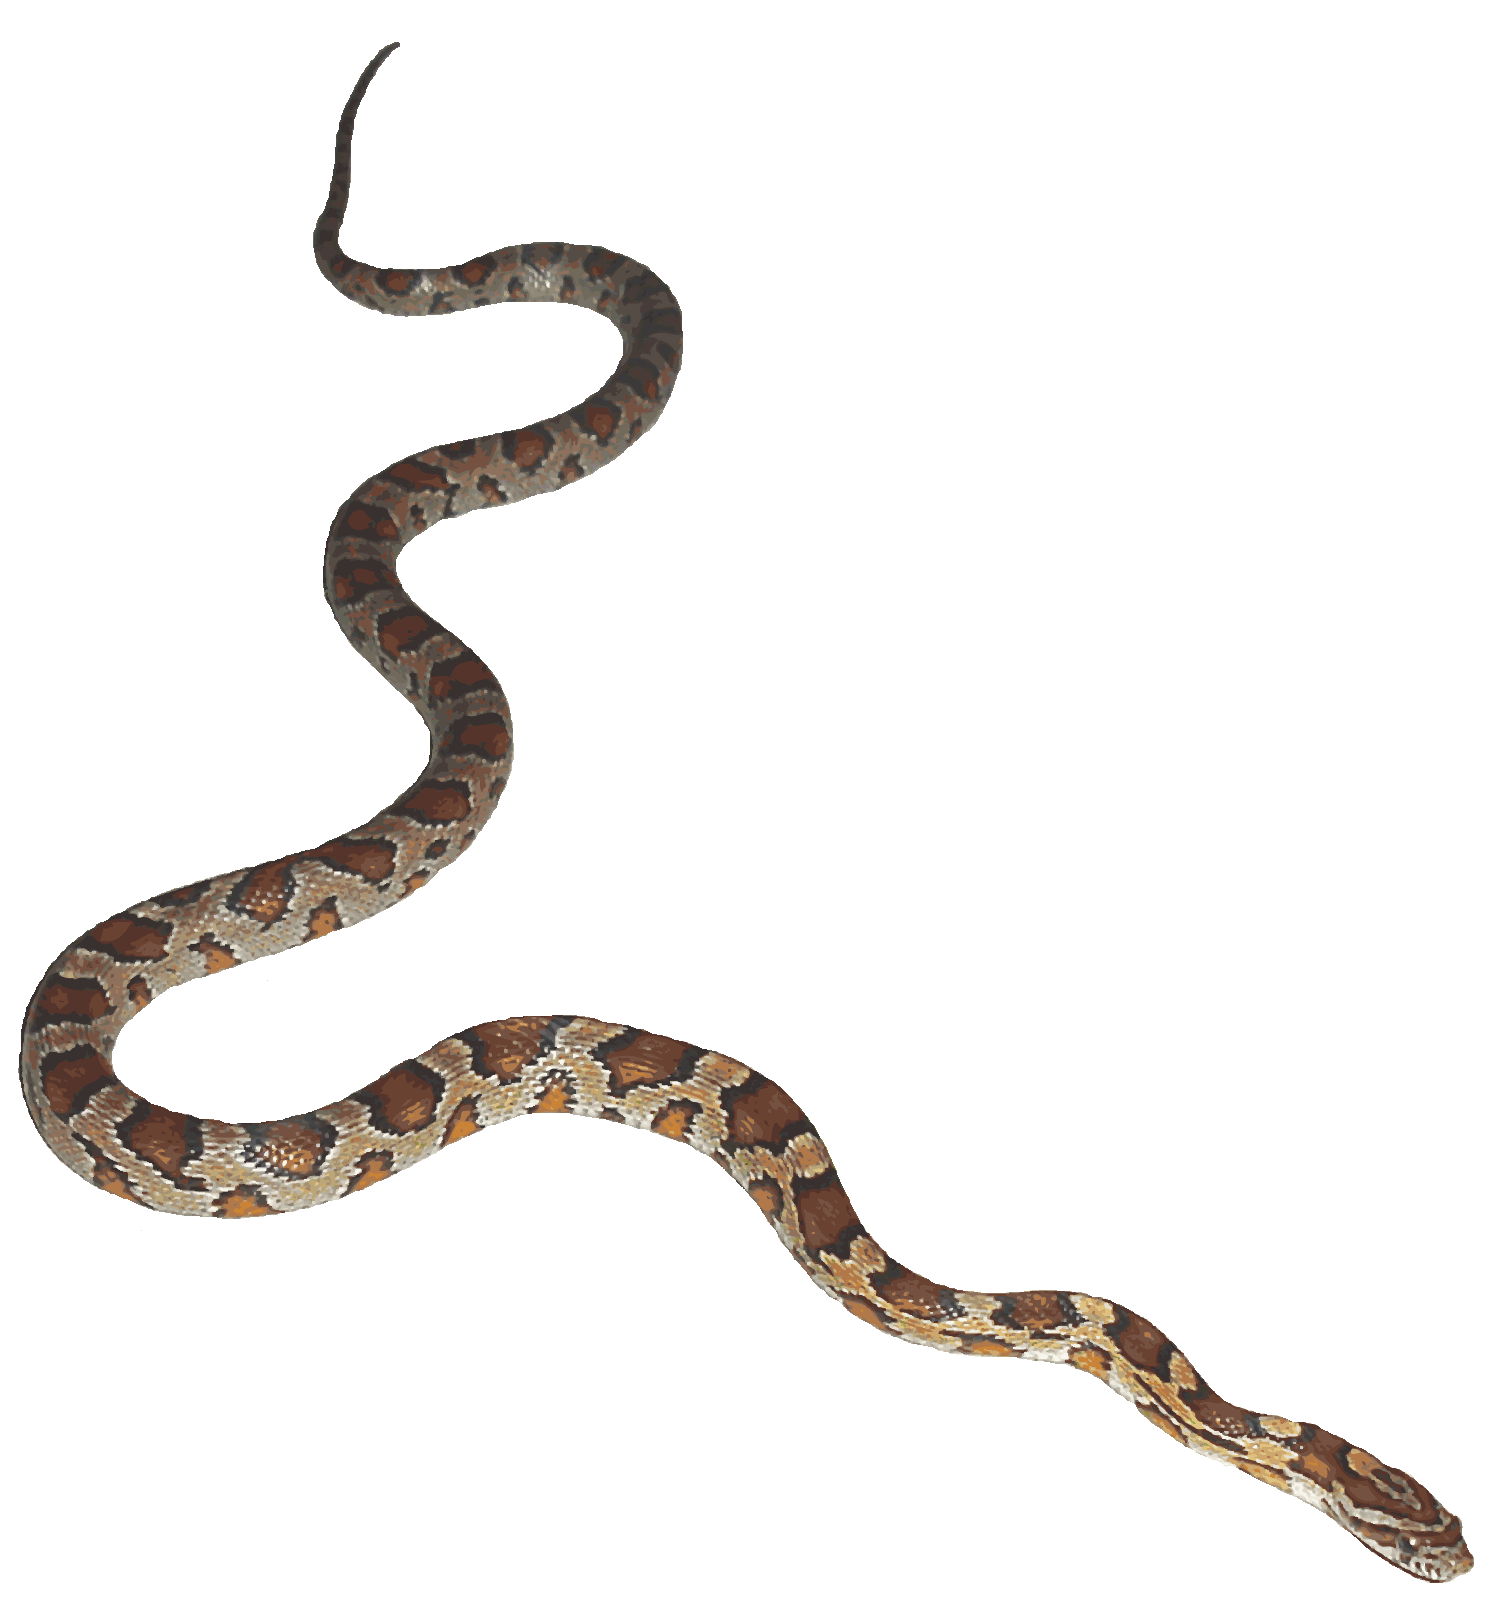 Free Animated Snake Pictures, Download Free Animated Snake Pictures png